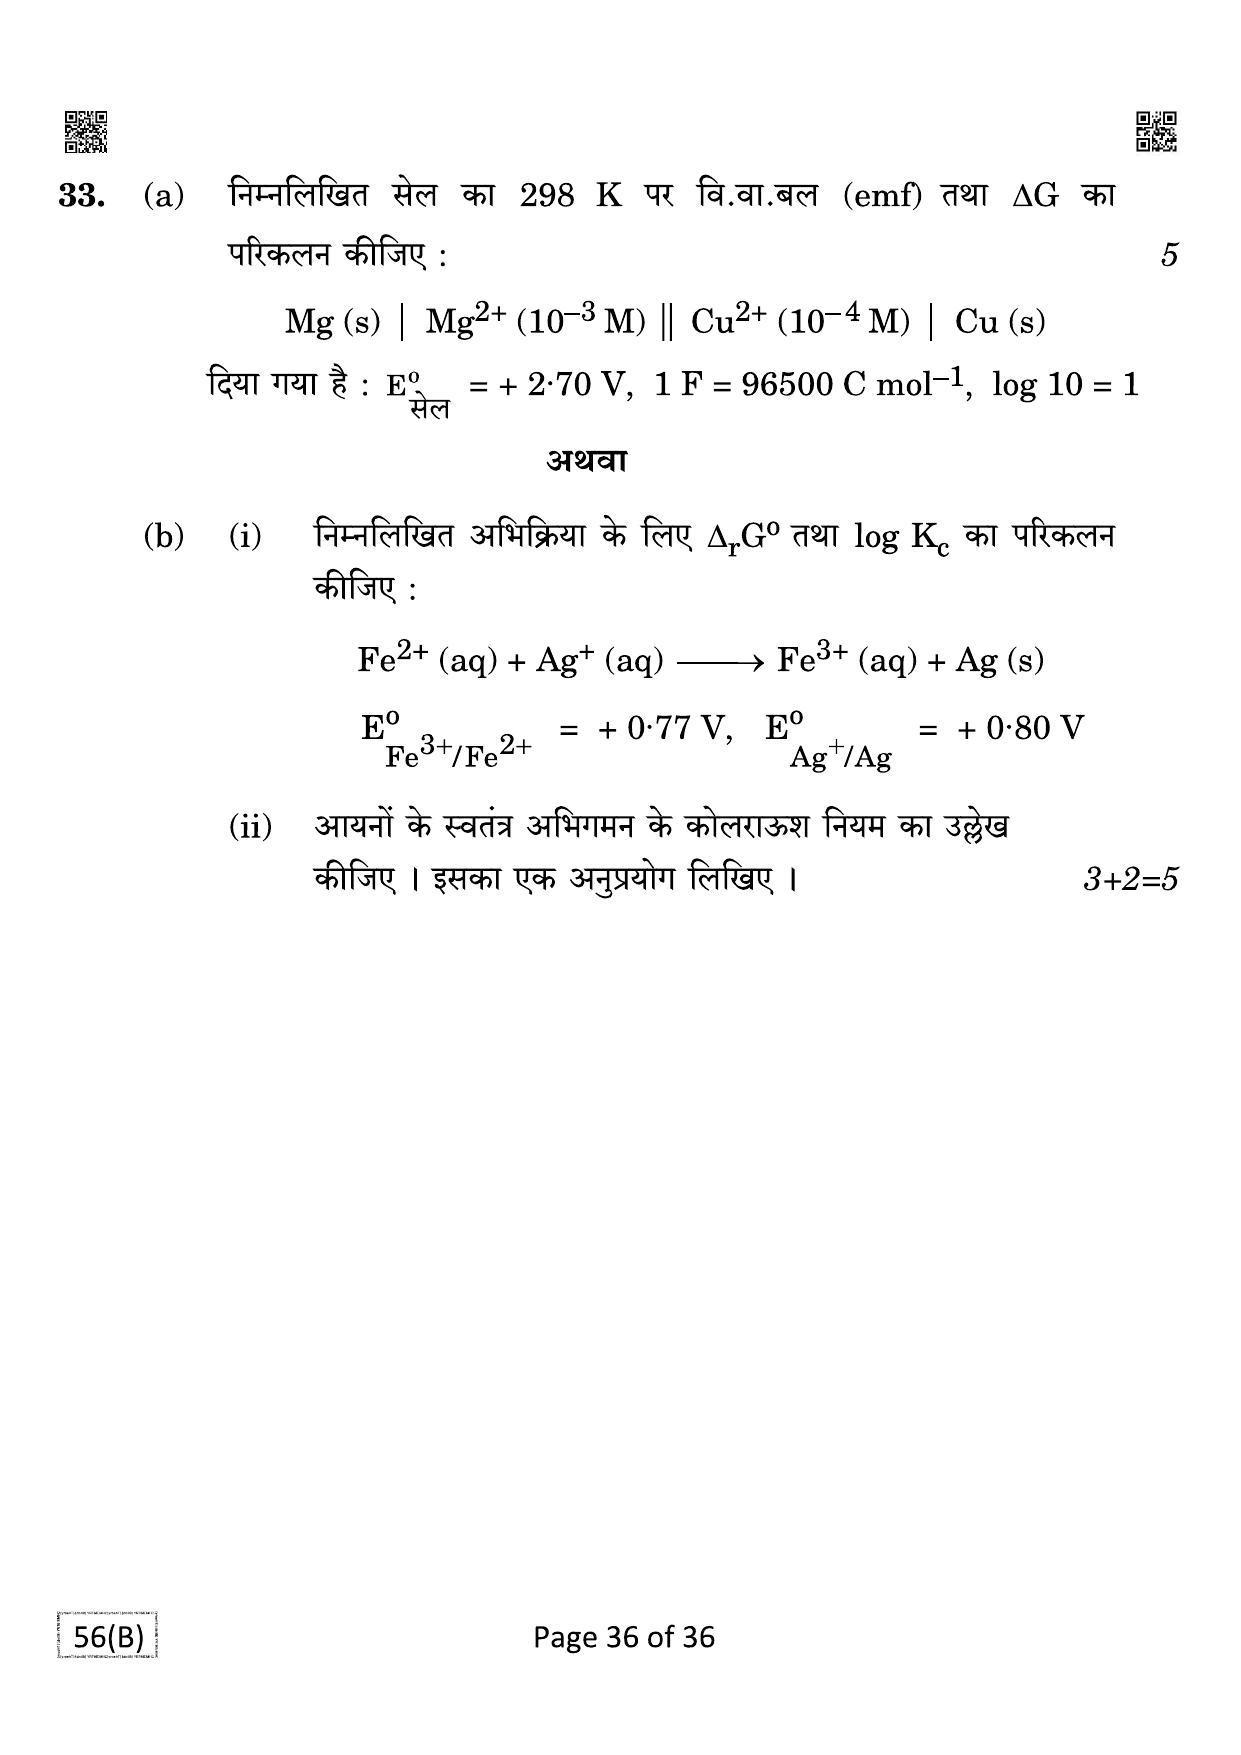 CBSE Class 12 QP_043_CHEMISTRY_FOR_BLIND_CANDIDATES 2021 Compartment Question Paper - Page 36